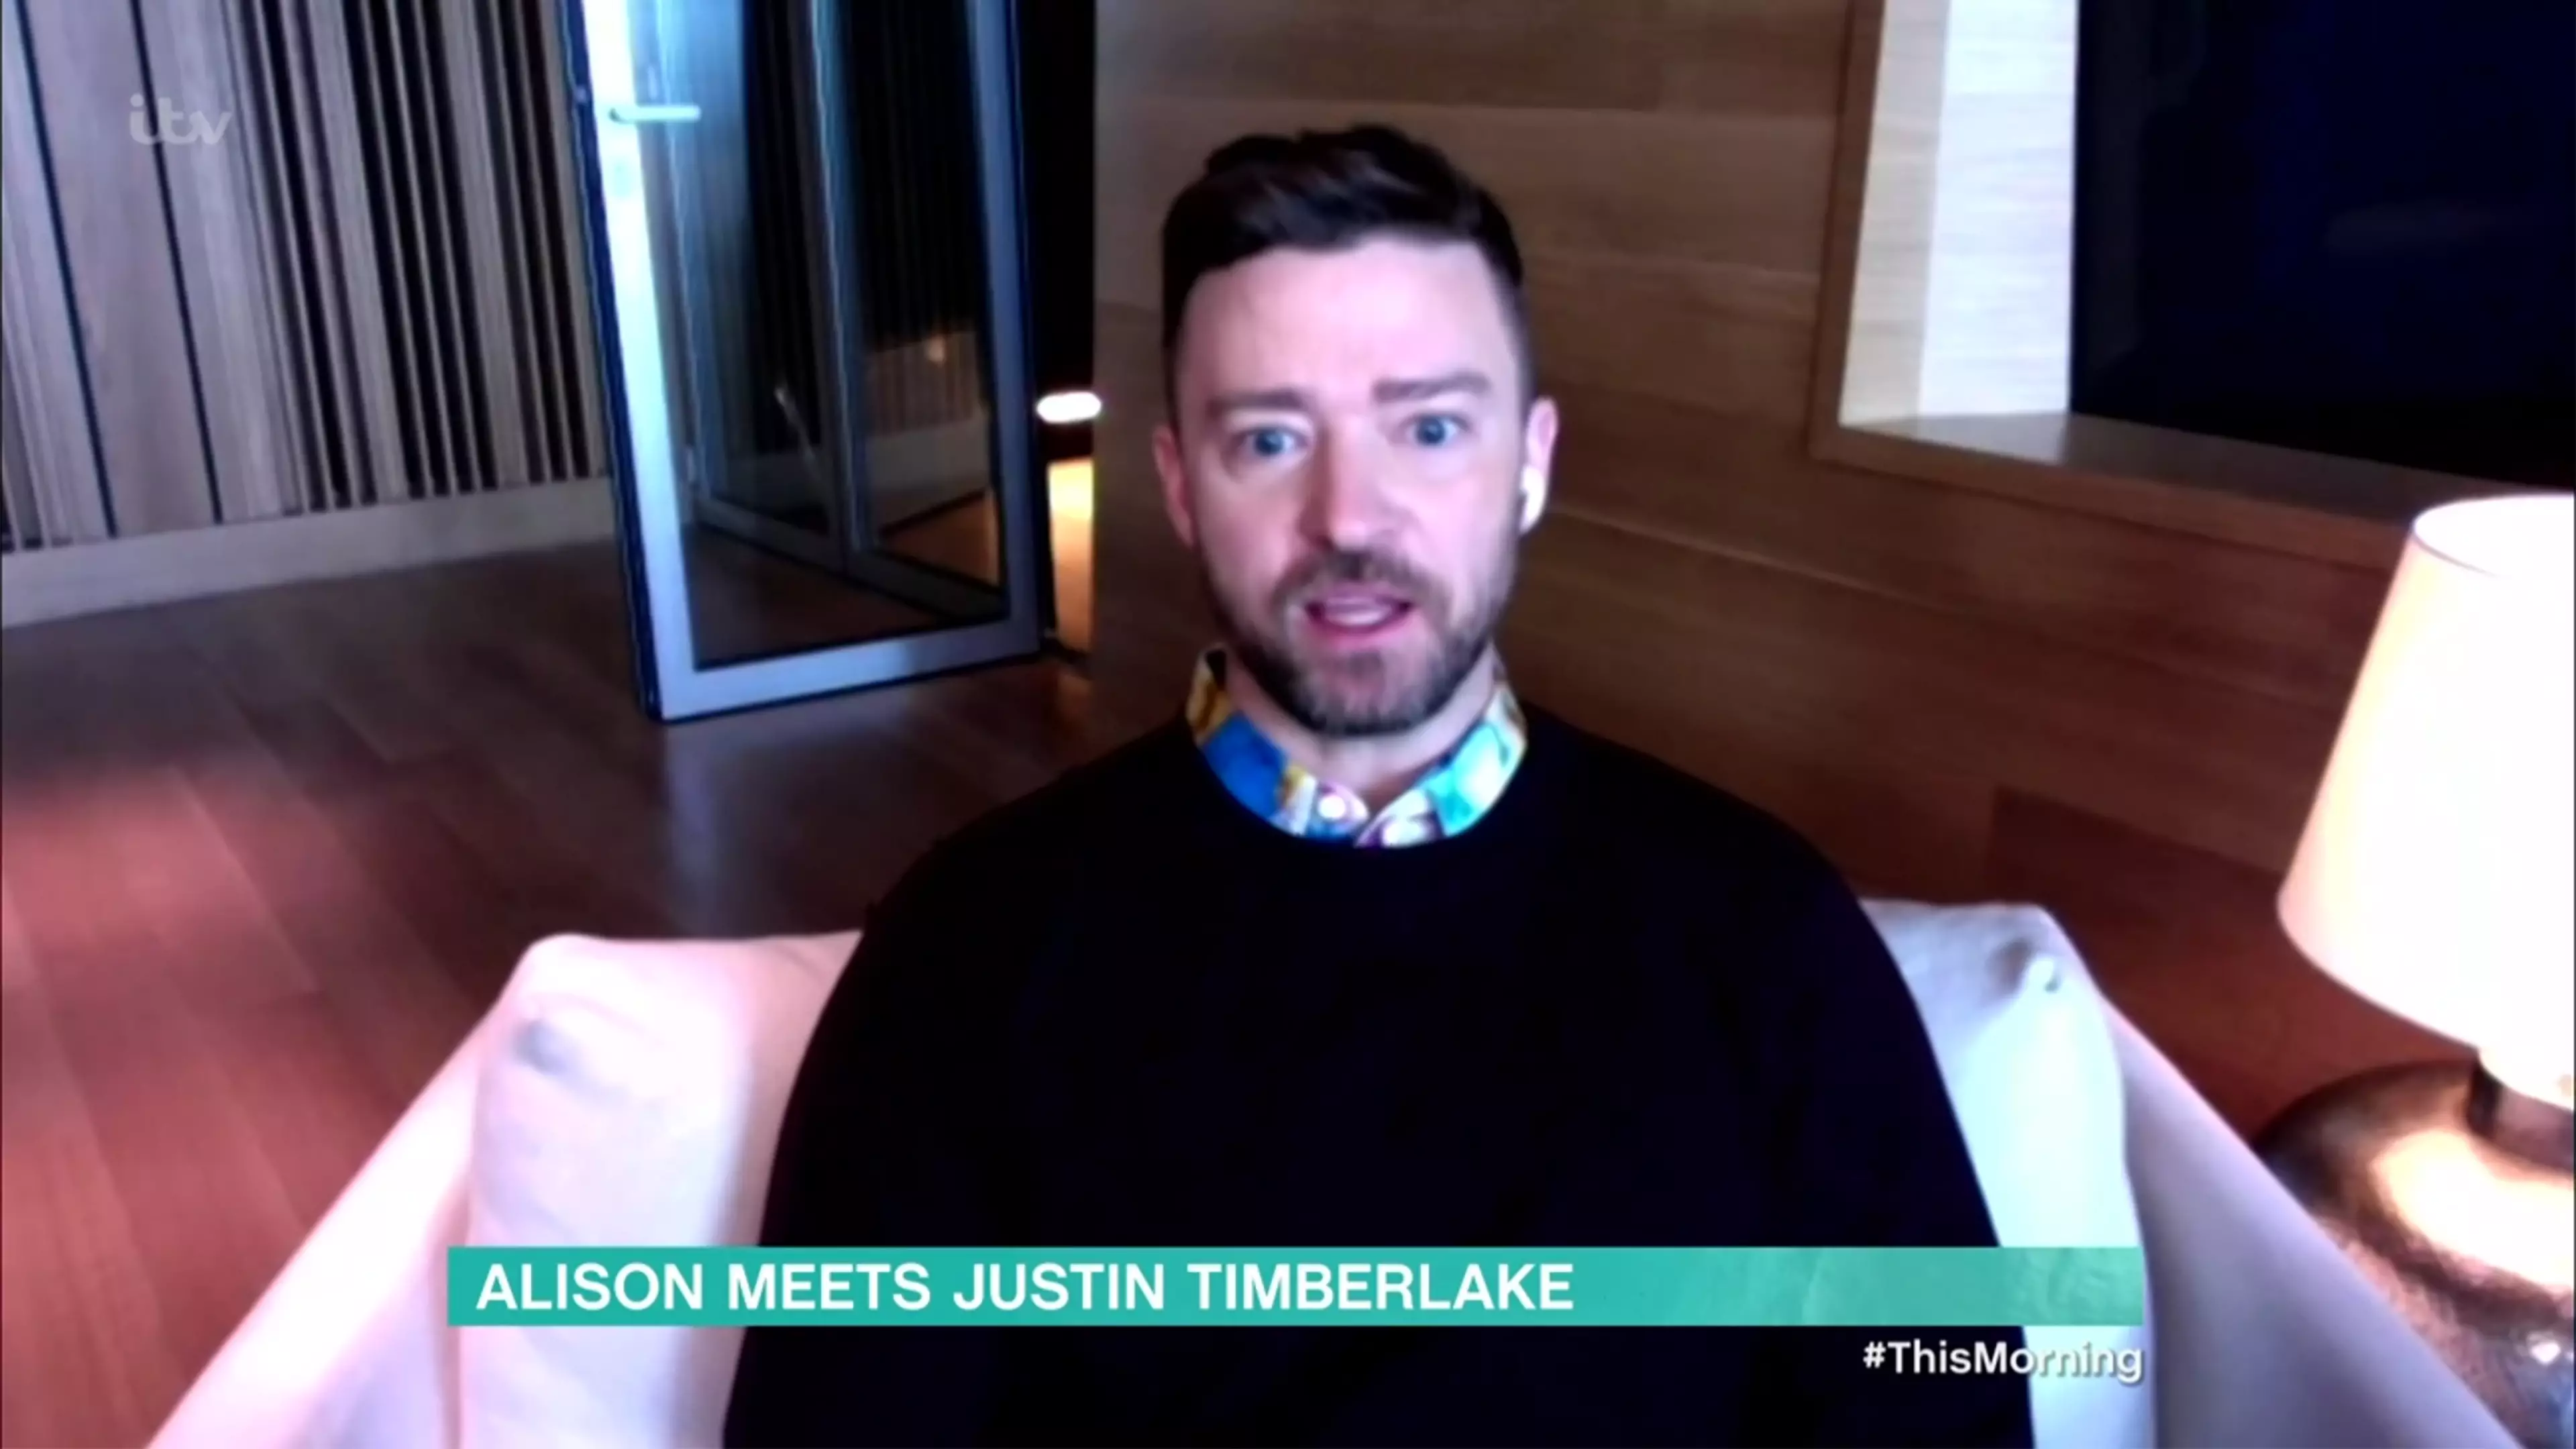 Justin Timberlake was interviewed by Alison for This Morning (